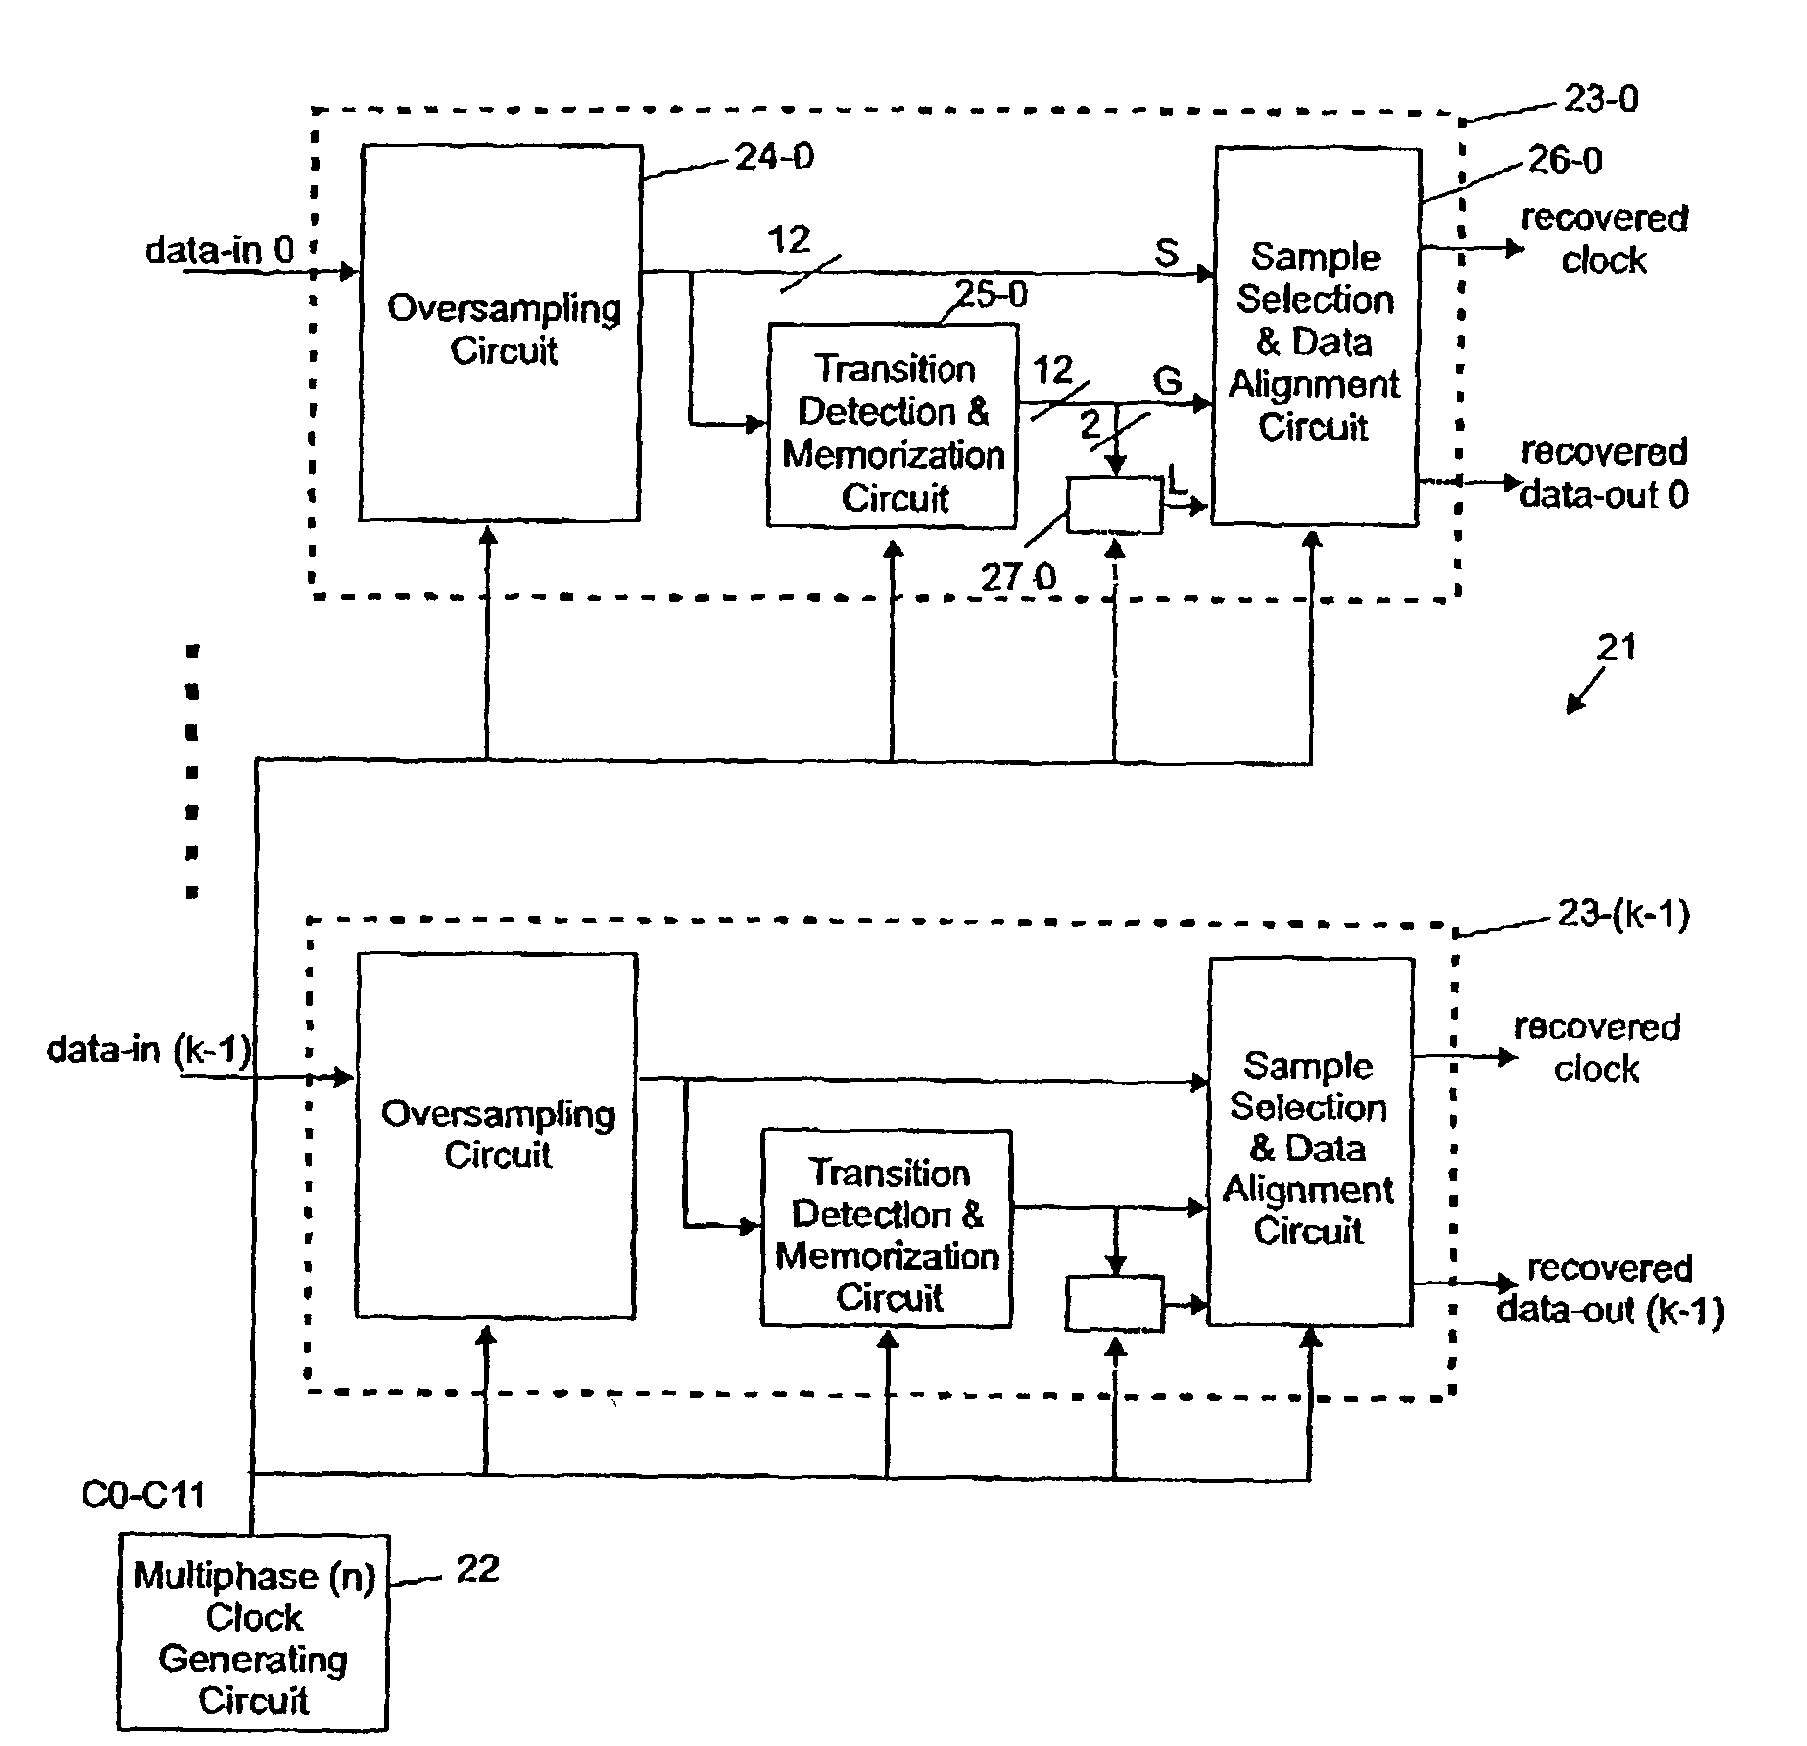 Sample selection and data alignment circuit